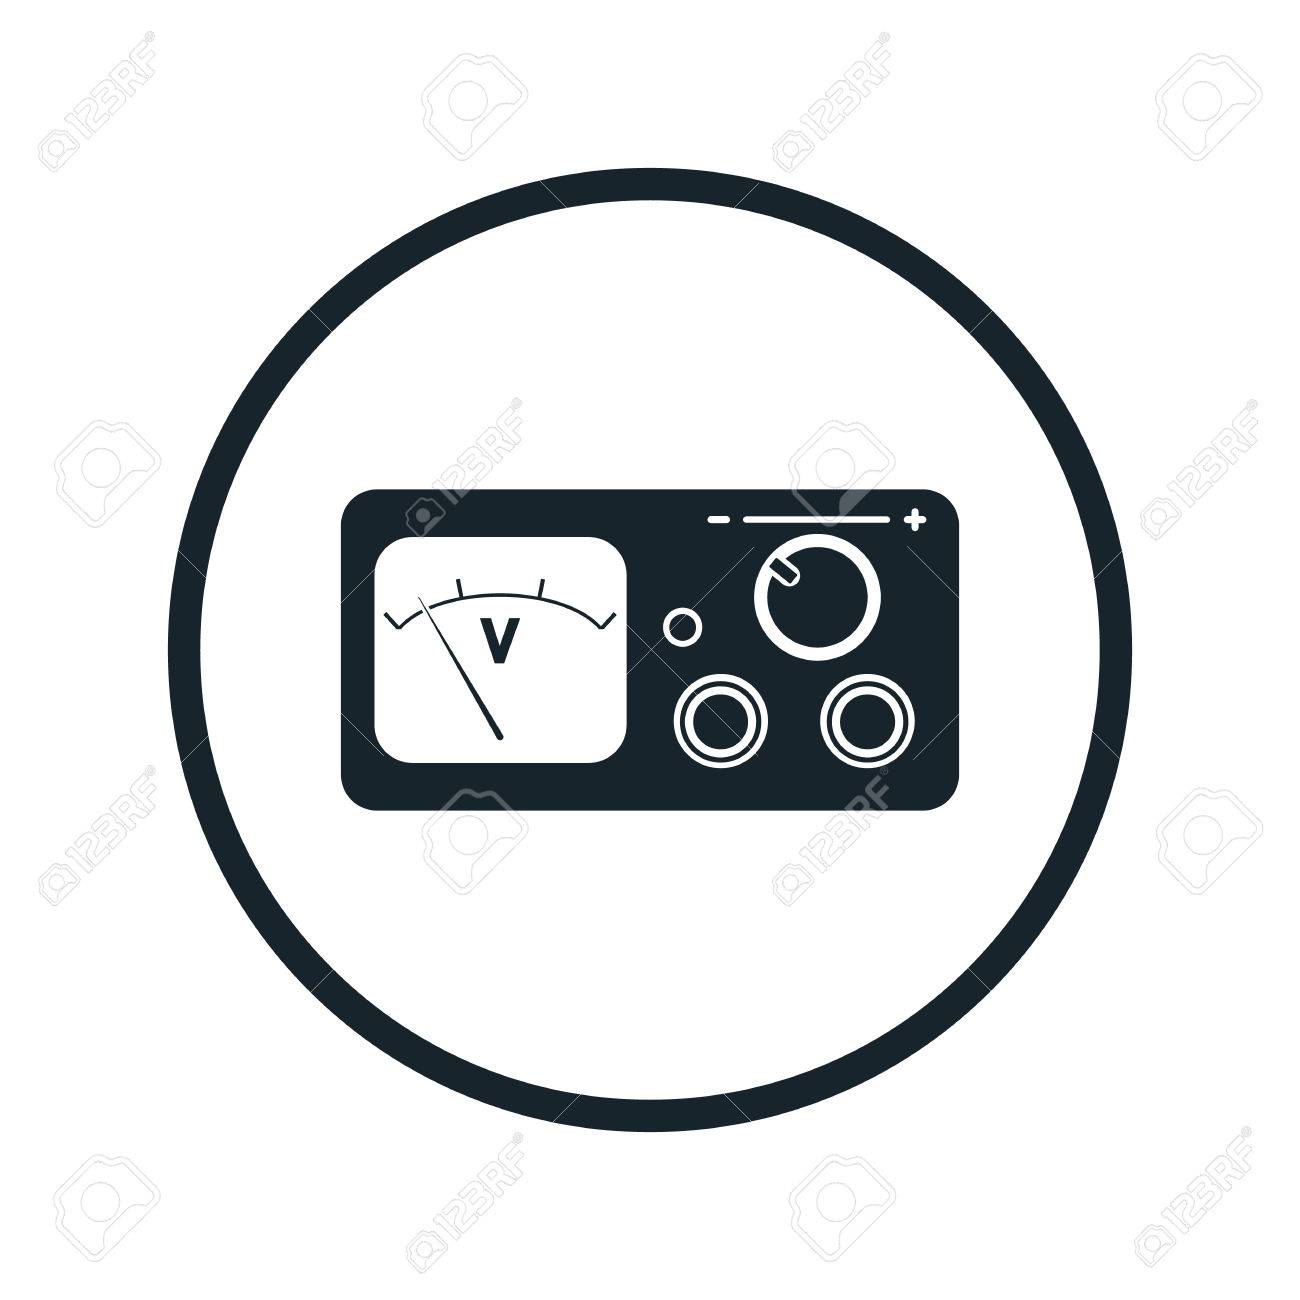 Power Supply Icon Royalty Free Cliparts, Vectors, And Stock 